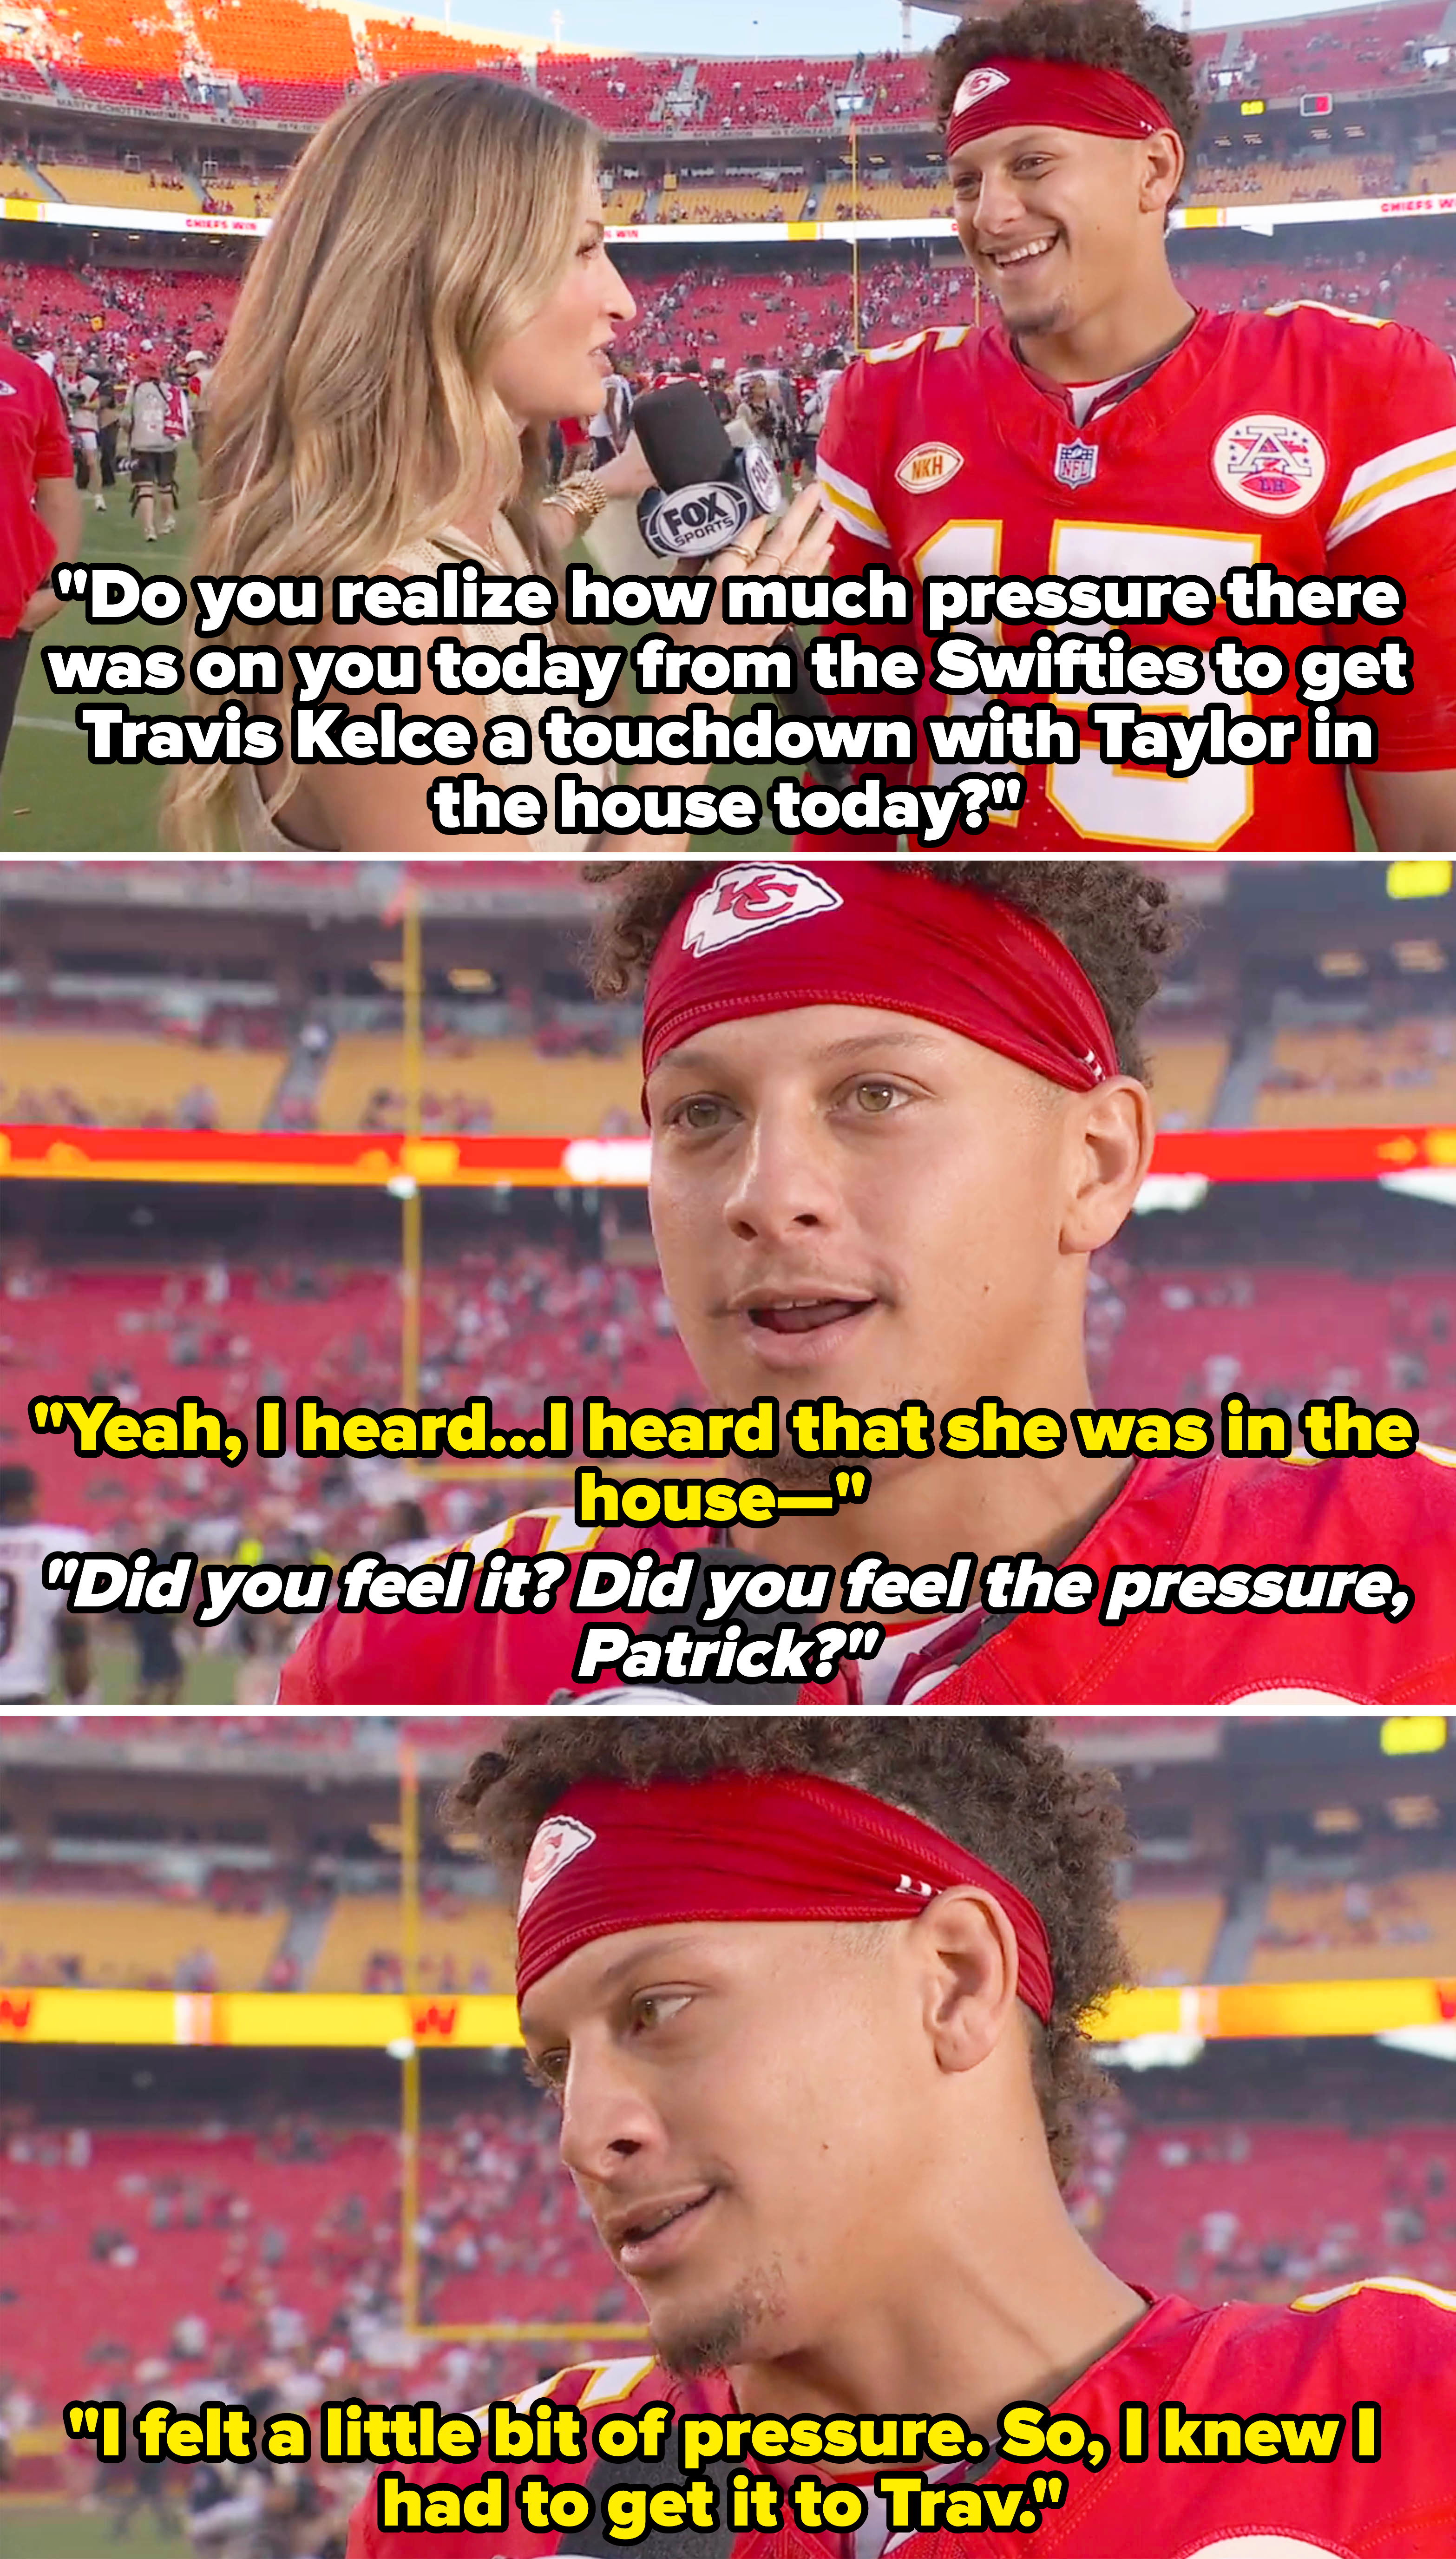 Patrick Mahomes being interviewed